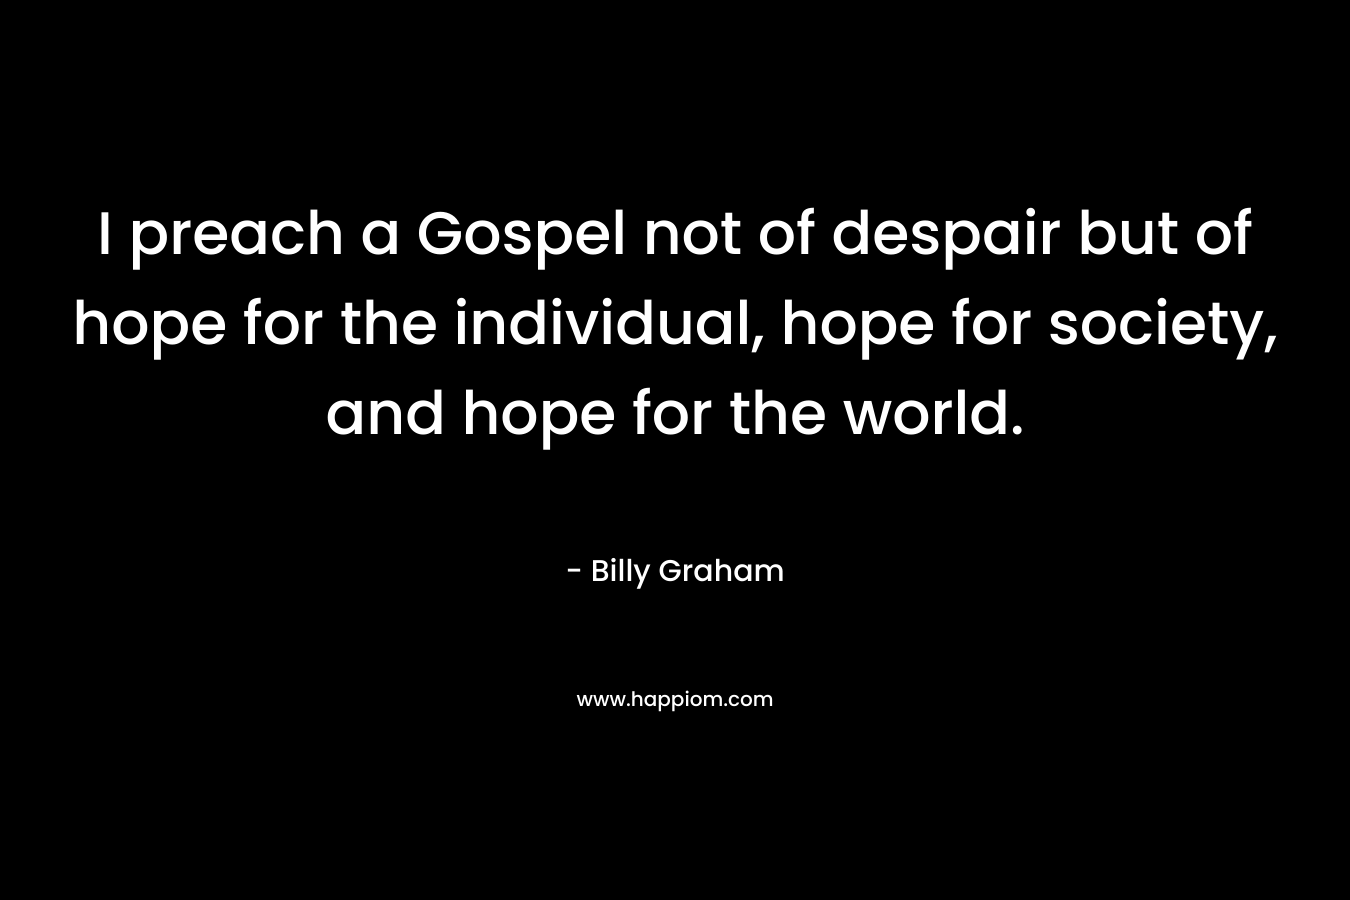 I preach a Gospel not of despair but of hope for the individual, hope for society, and hope for the world.